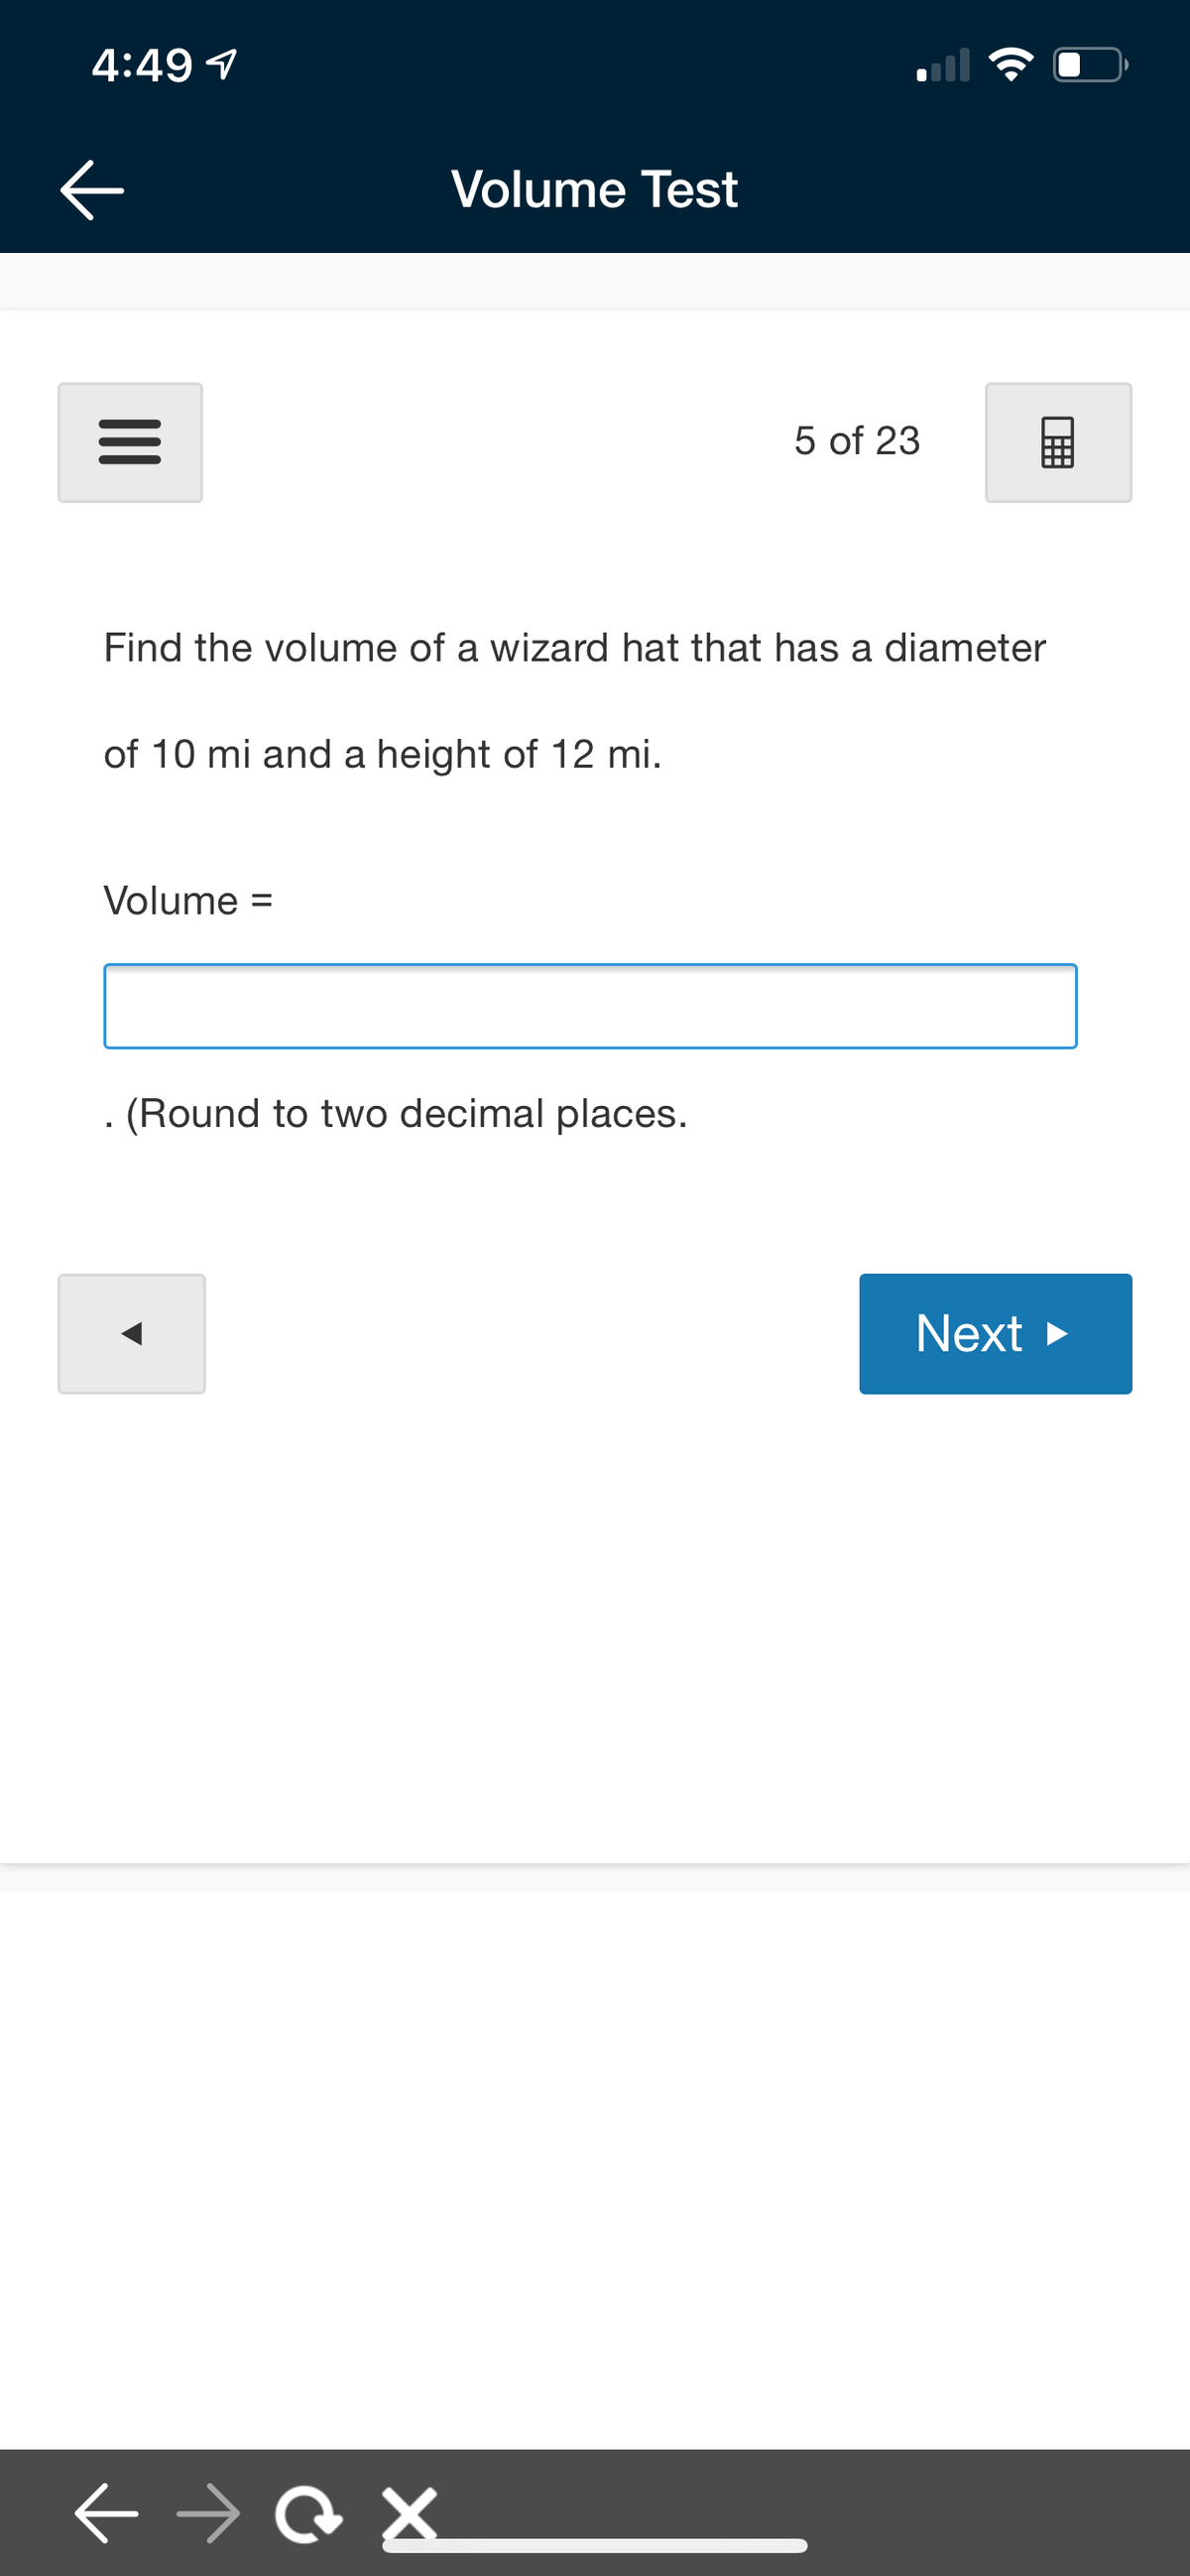 4:49 1
Volume Test
5 of 23
Find the volume of a wizard hat that has a diameter
of 10 mi and a height of 12 mi.
Volume
%3D
. (Round to two decimal places.
Next >
II
